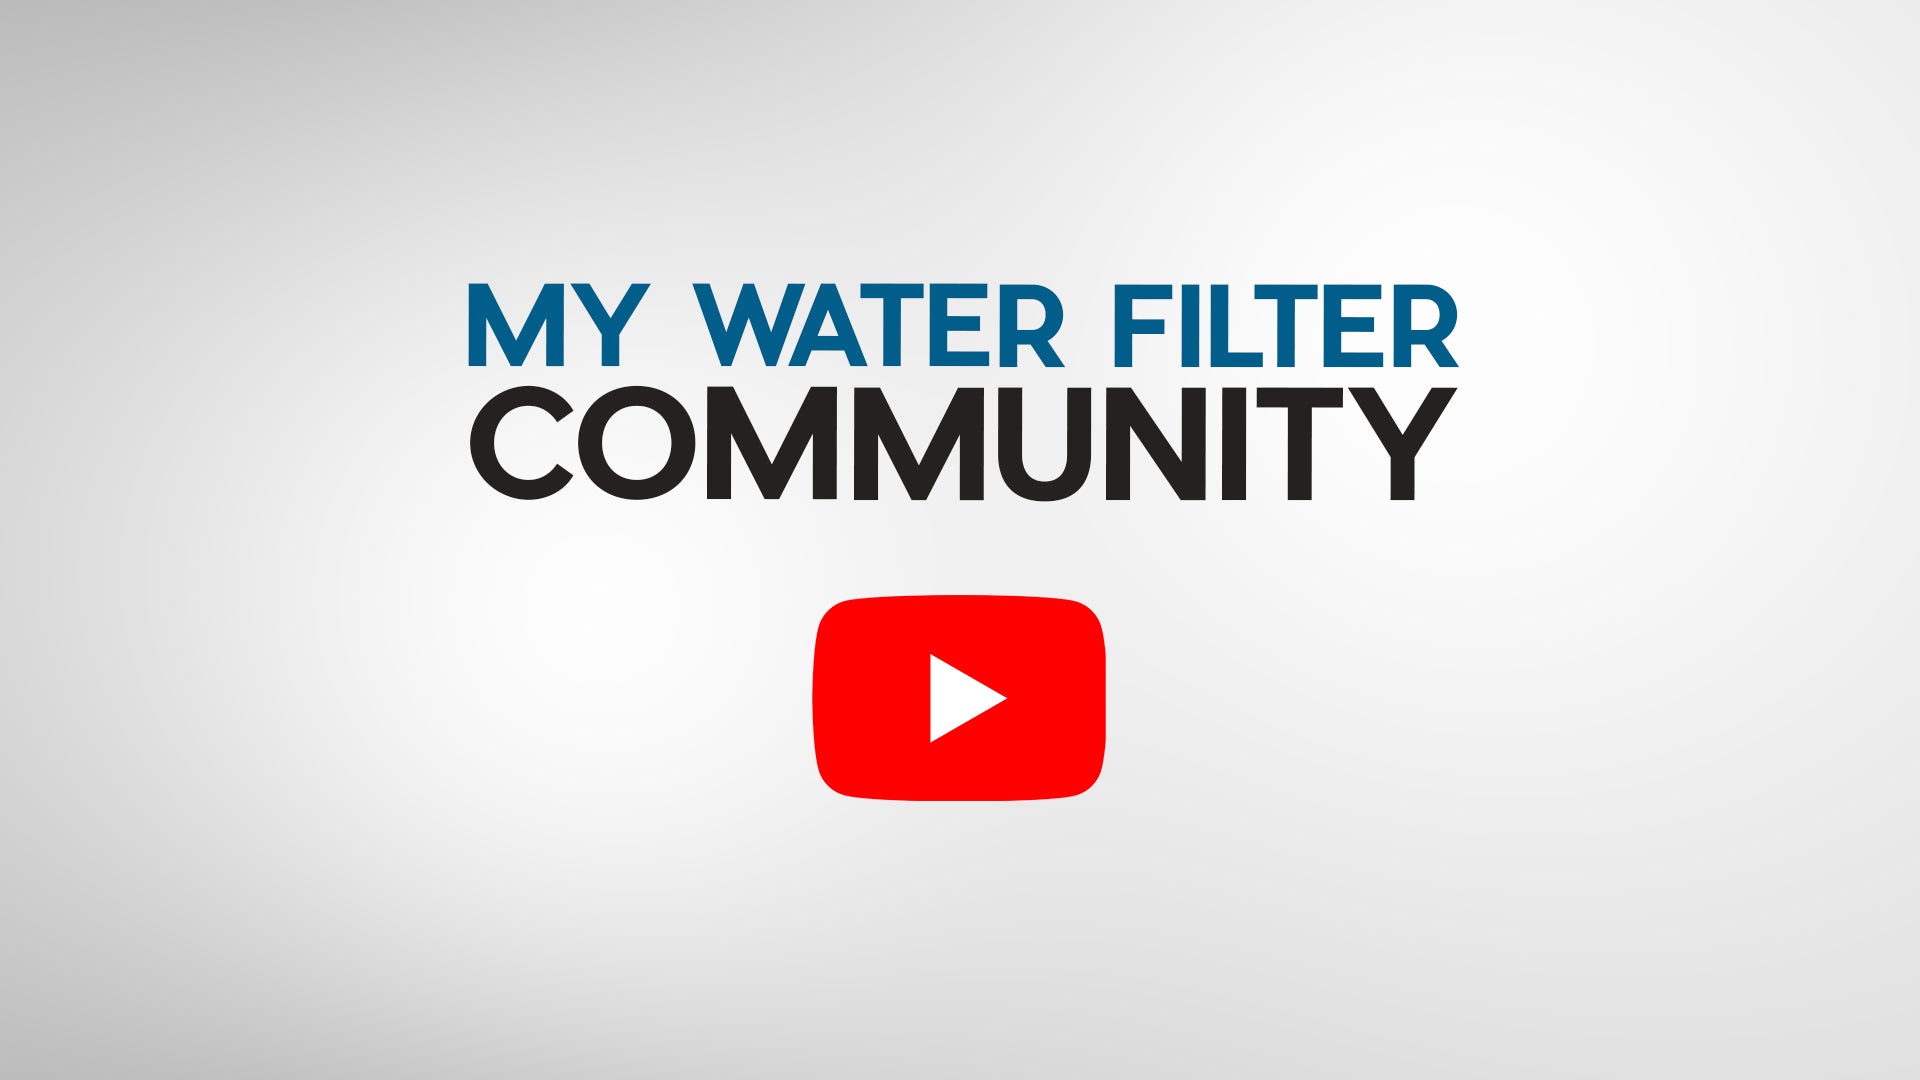 The My Water Filter Community